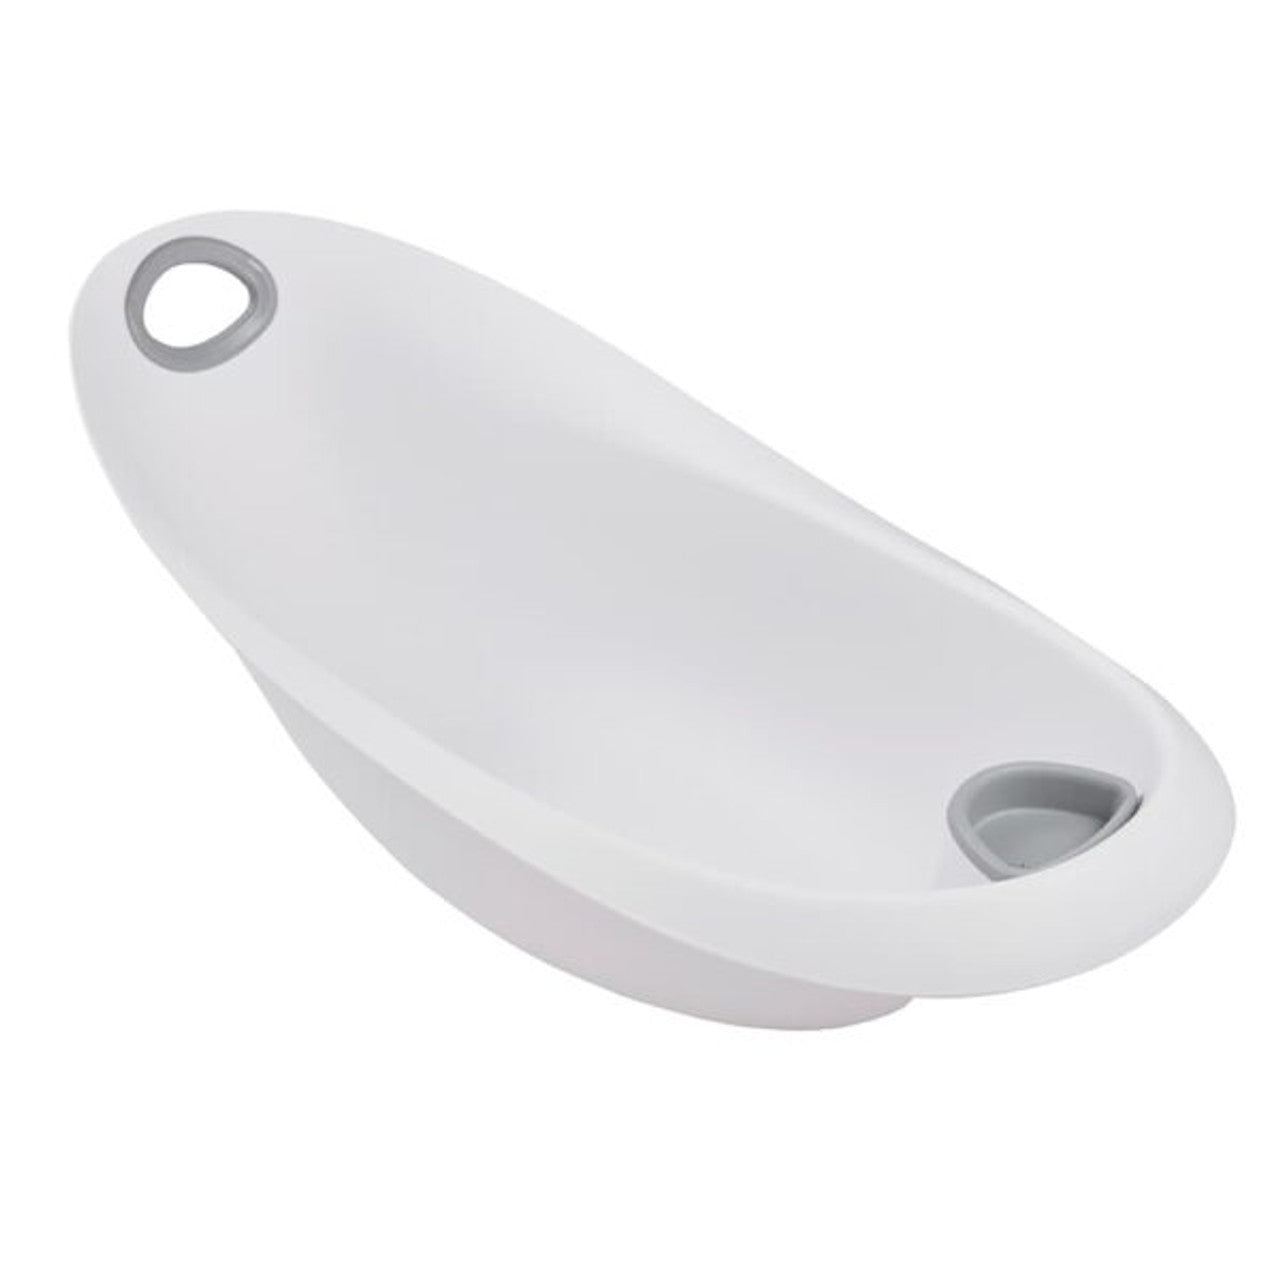 Keeper Baby Bath With Insert - White/Grey